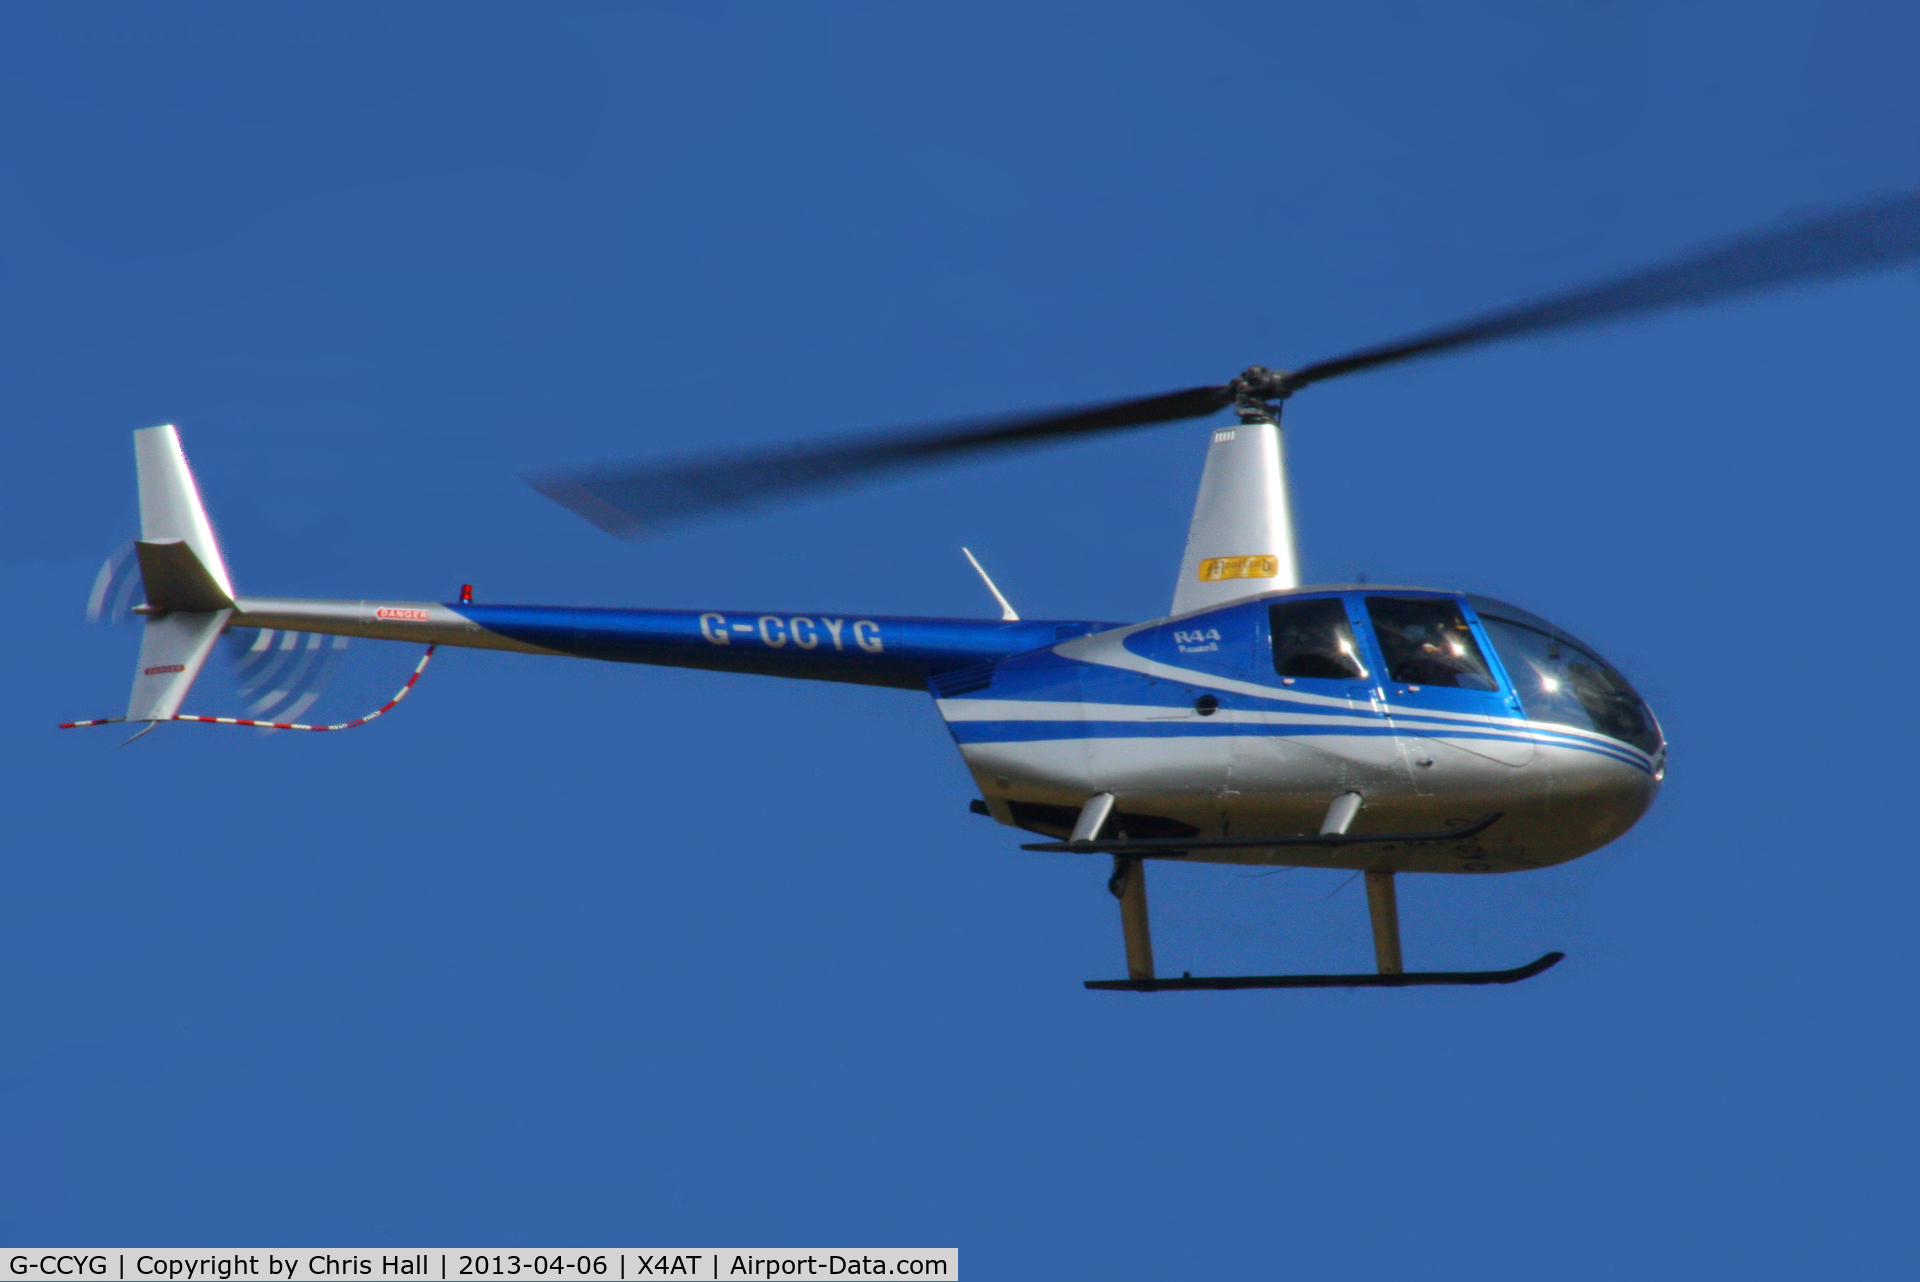 G-CCYG, 2004 Robinson R44 Raven II C/N 10424, Ferrying racegoers into Aintree for the 2013 Grand National